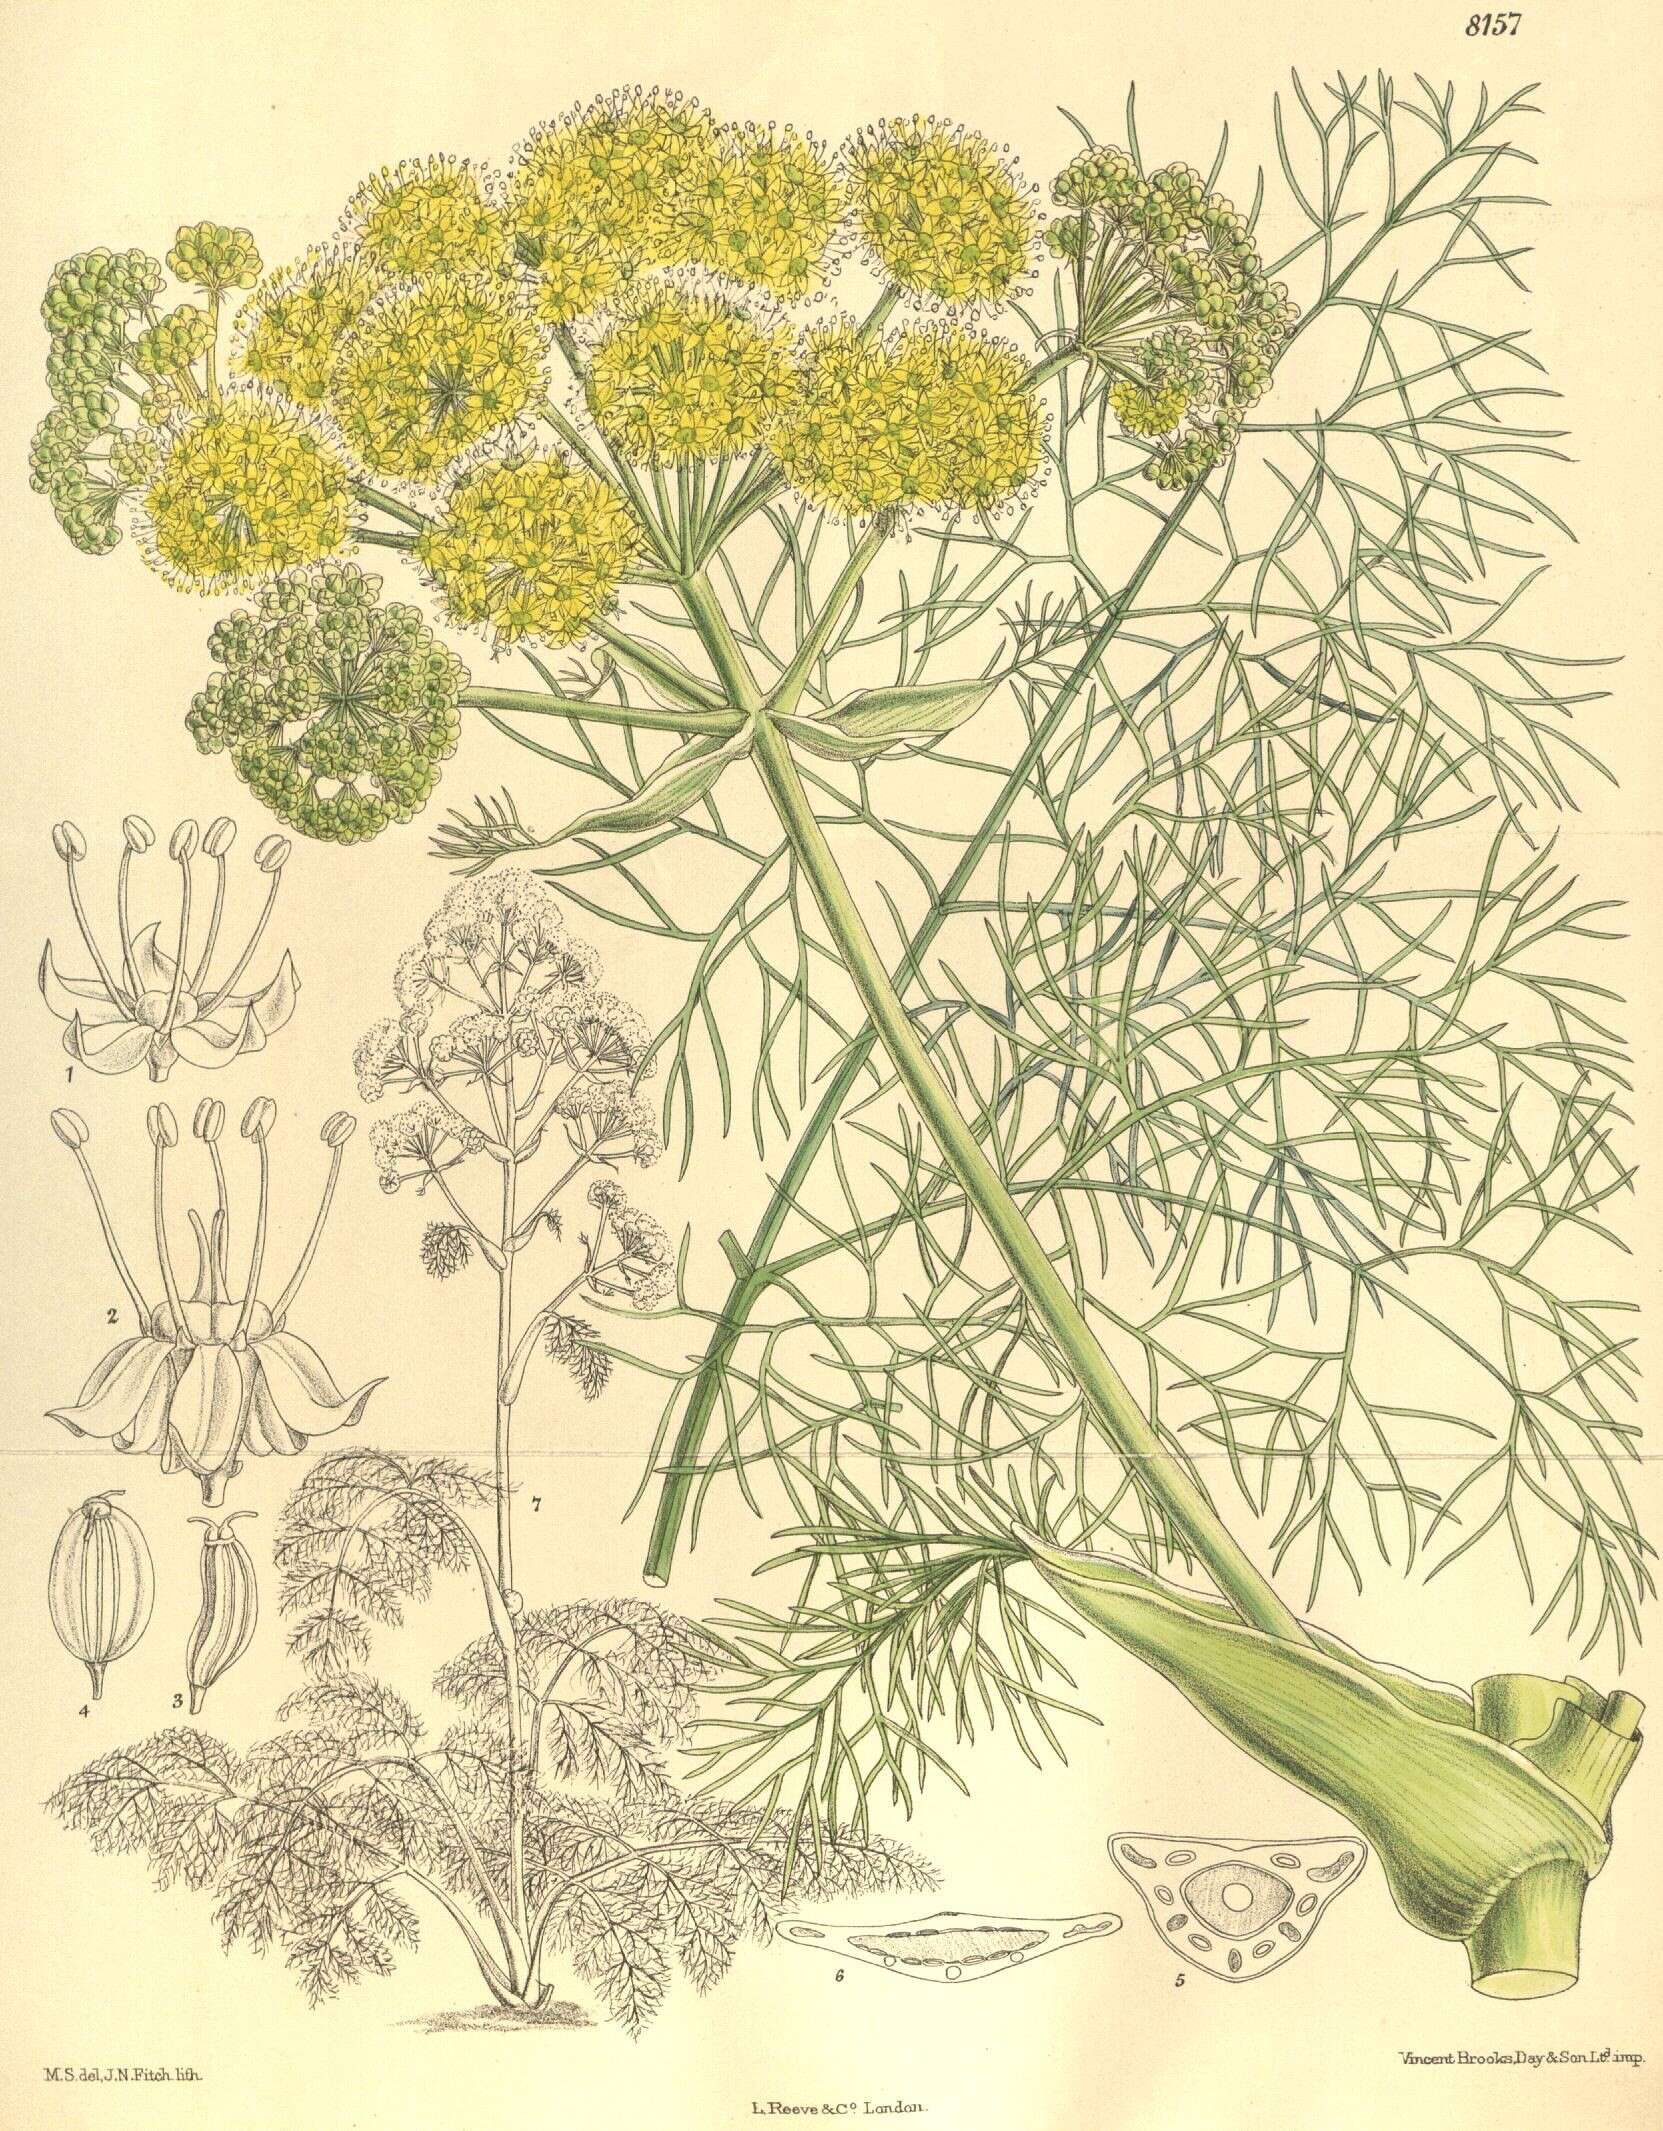 Health benefits of Giant fennel